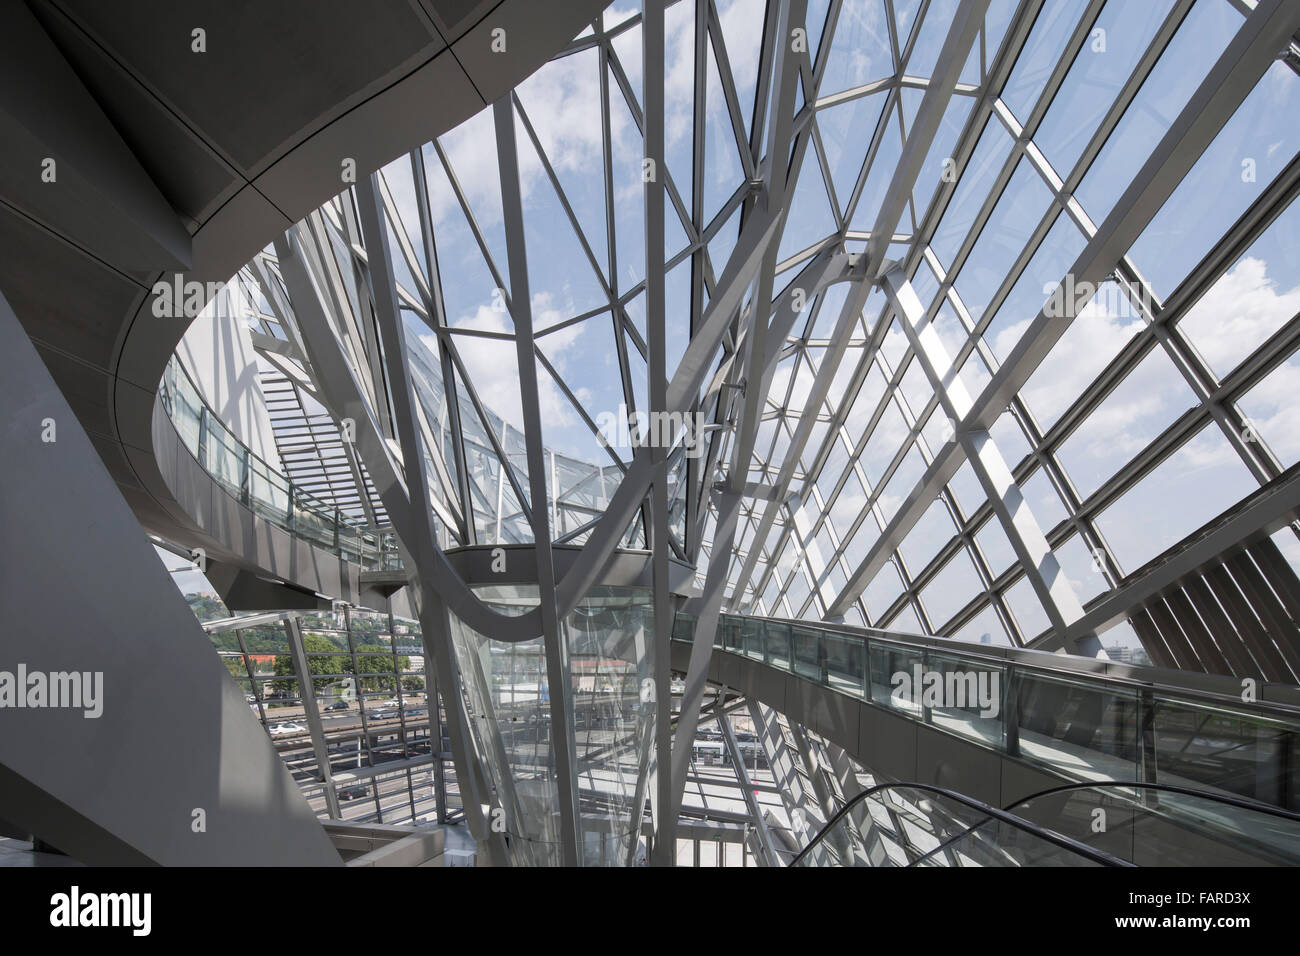 Gravity well and spiral ramp. Musée des Confluences, Lyon, France. Architect: COOP HIMMELB(L)AU, 2014. Stock Photo